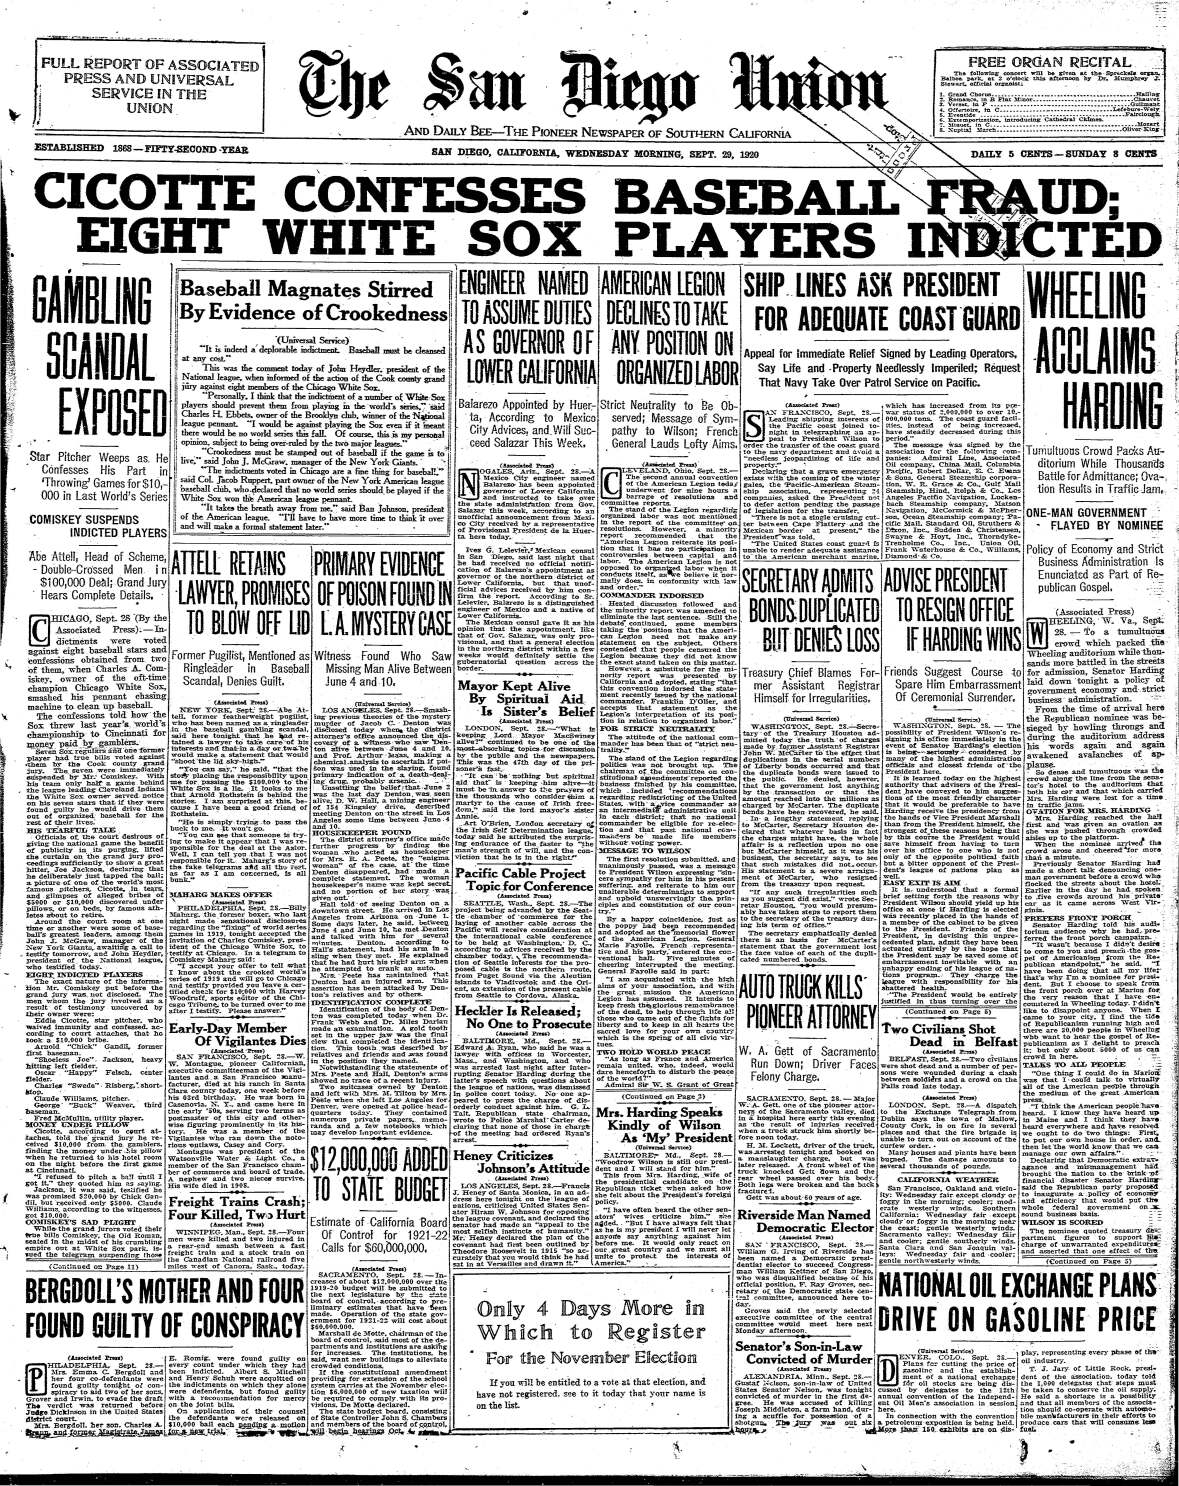 The Black Sox Scandal – Society for American Baseball Research